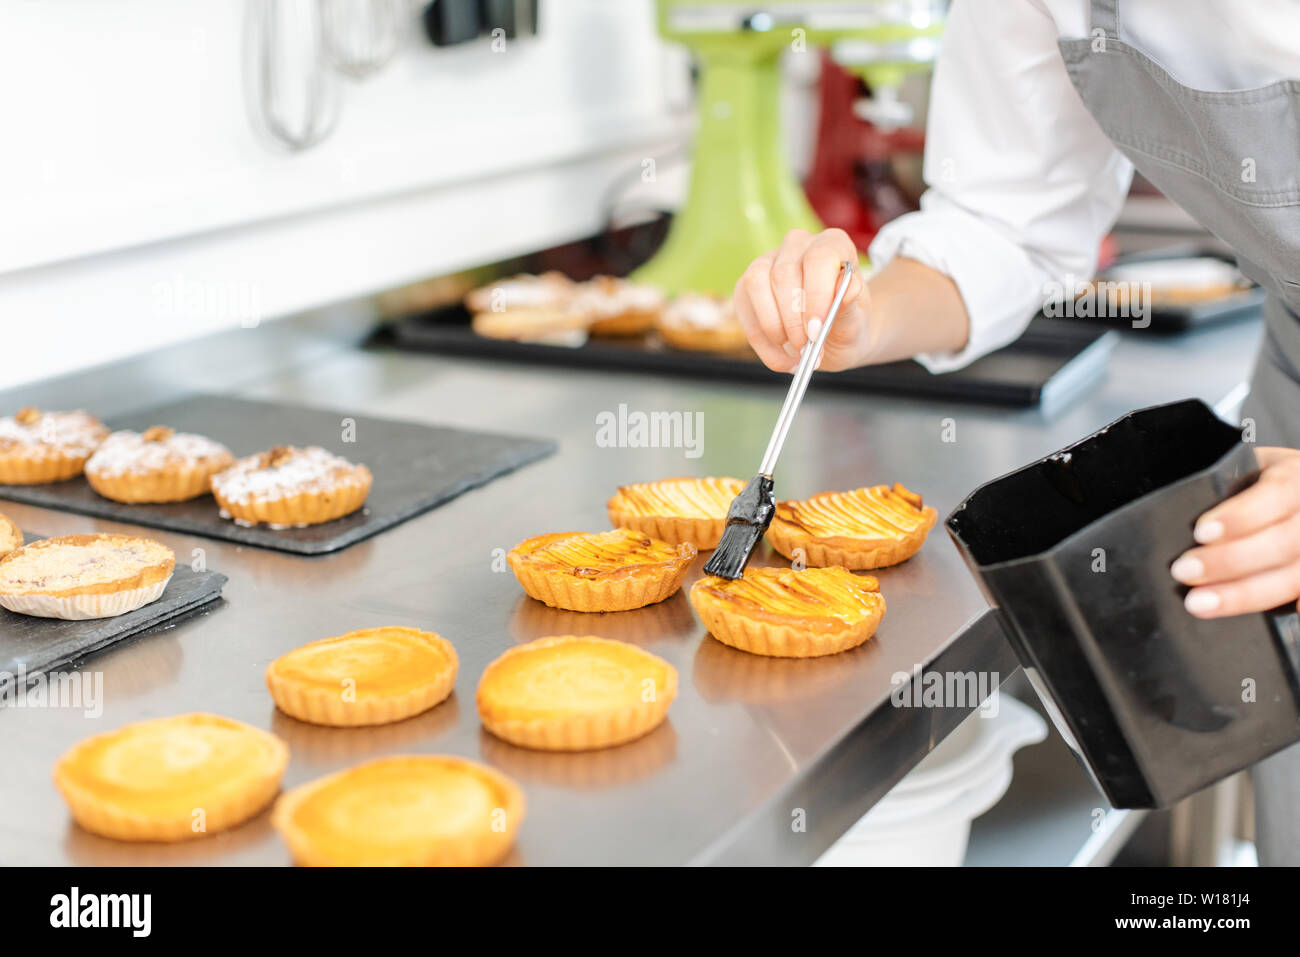 Pastry chef woman glazing little cakes Stock Photo